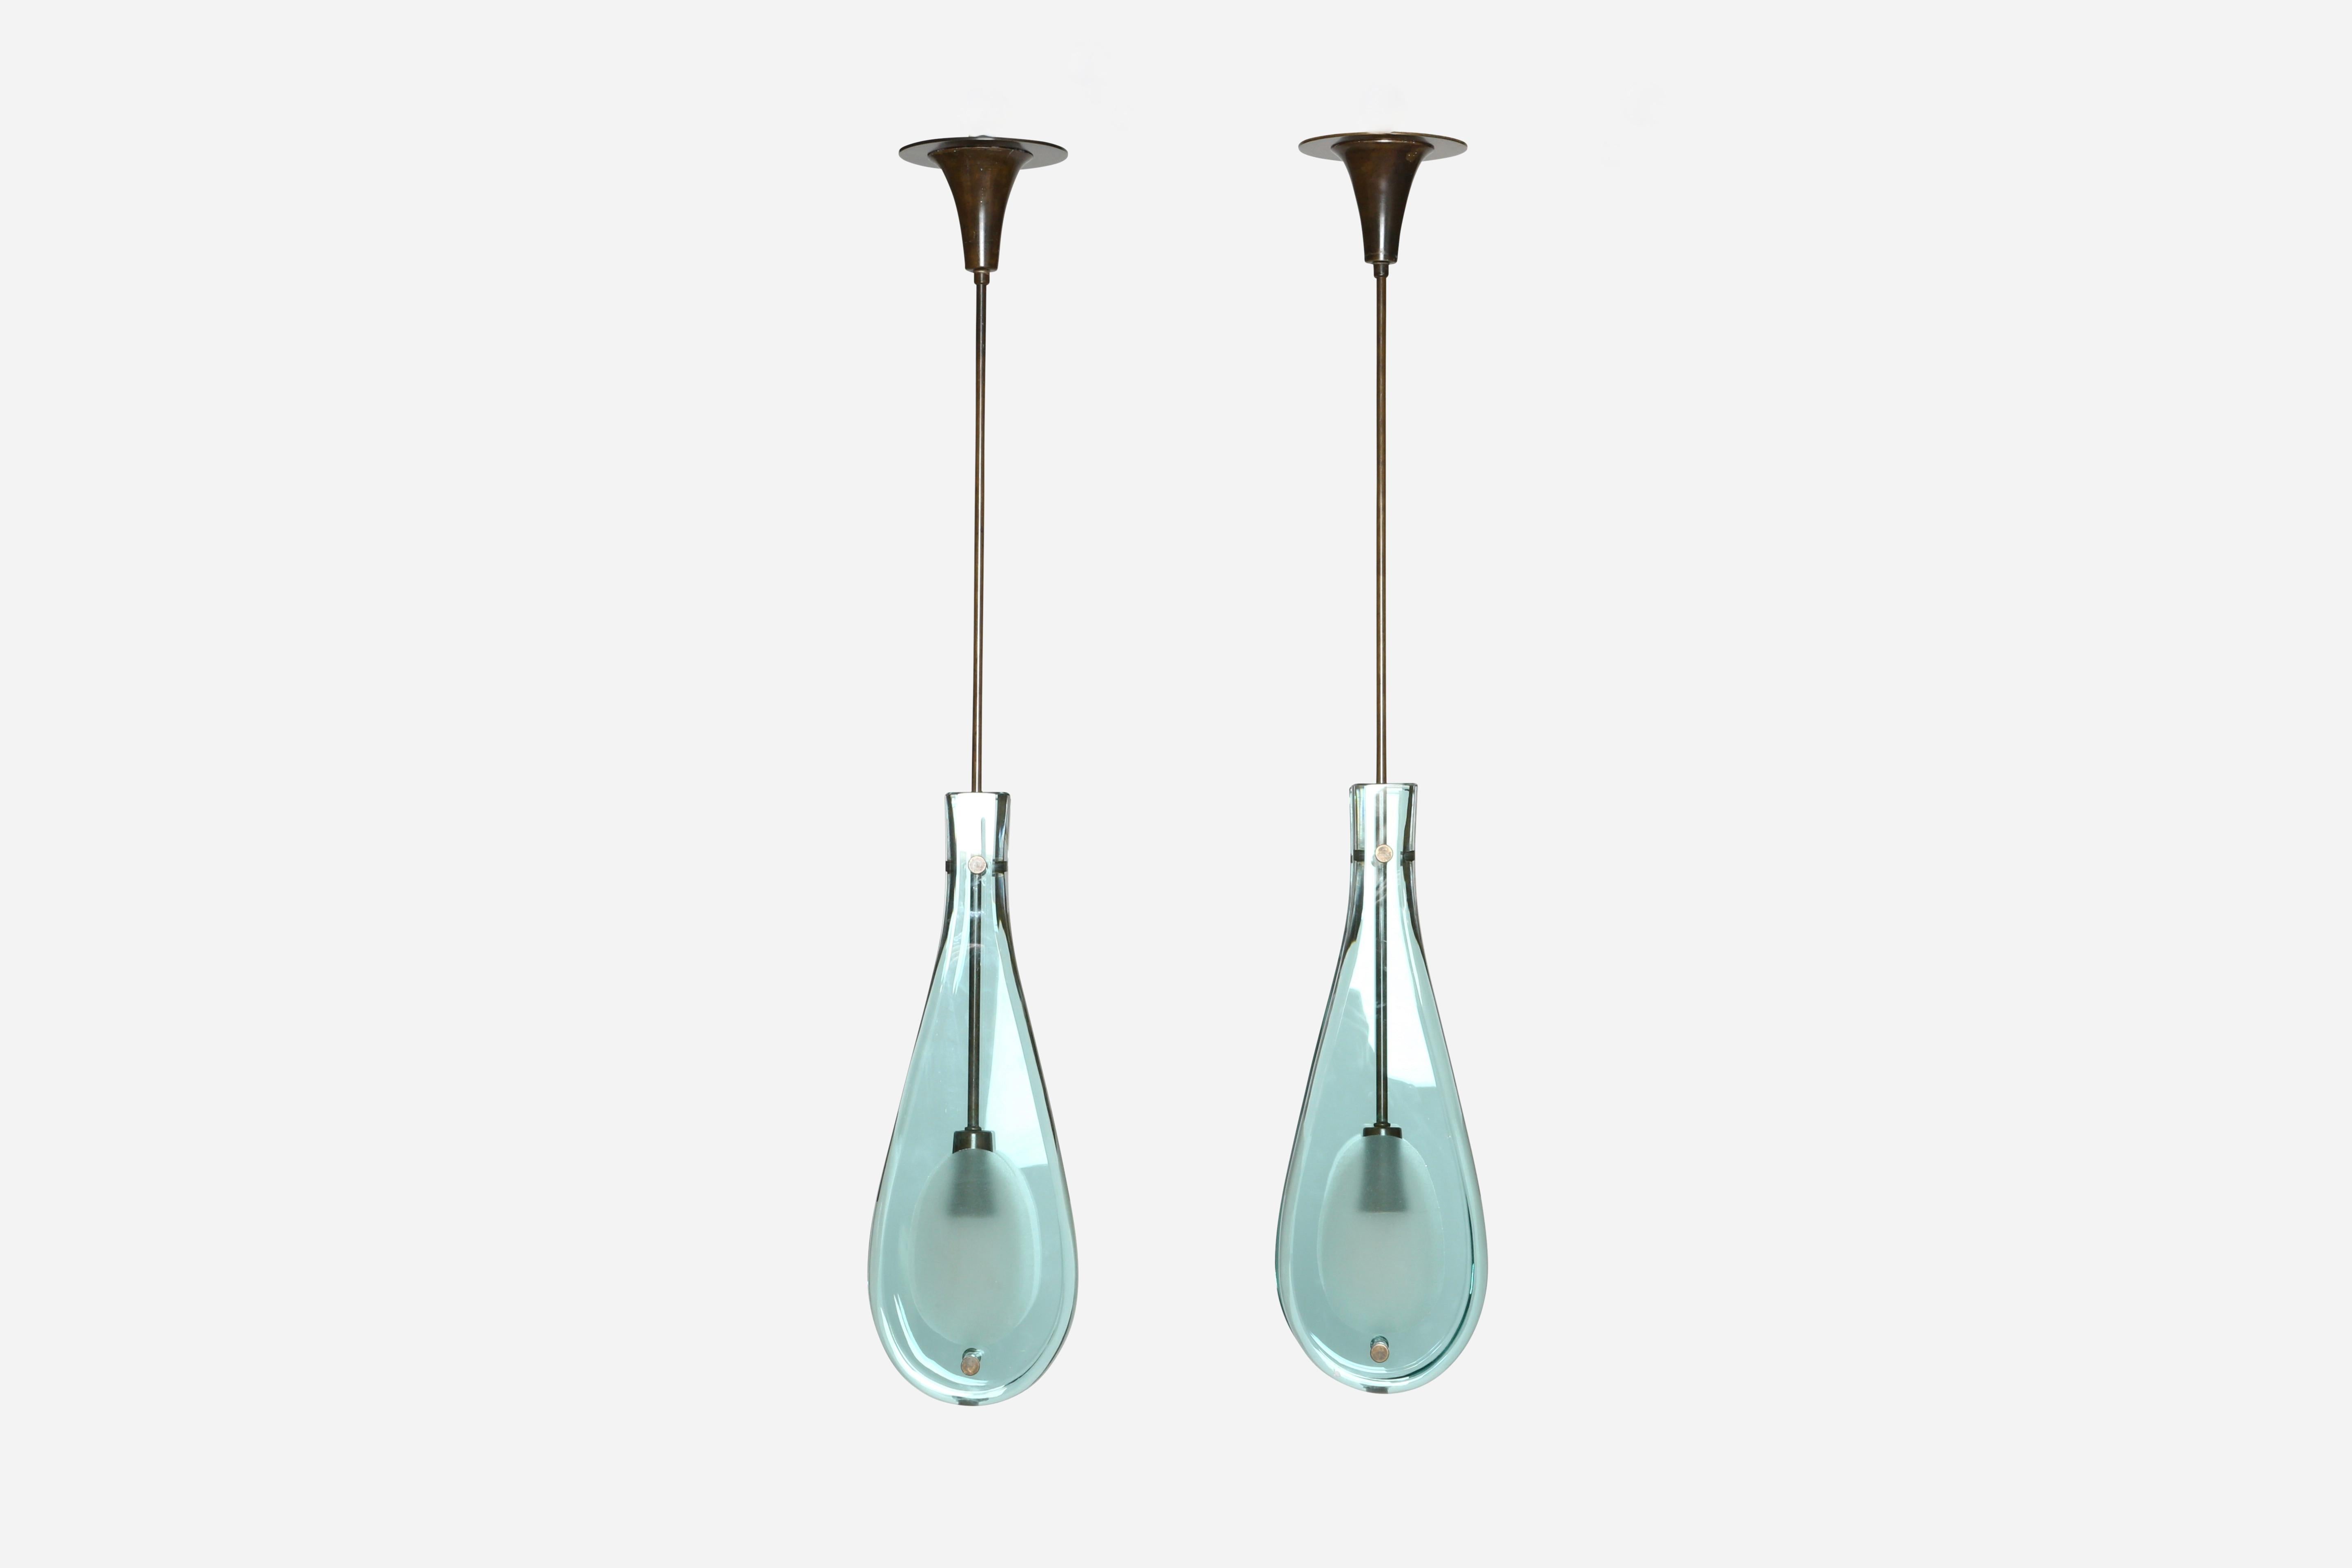 Max Ingrand for Fontana model 2259 ceiling pendants, a pair
Designed and made in Italy in 1960s.
Glass is 16 inches in height and 6 inches wide.
Take one candelabra bulb each.
Complimentary US rewiring upon request.
Overall drop is